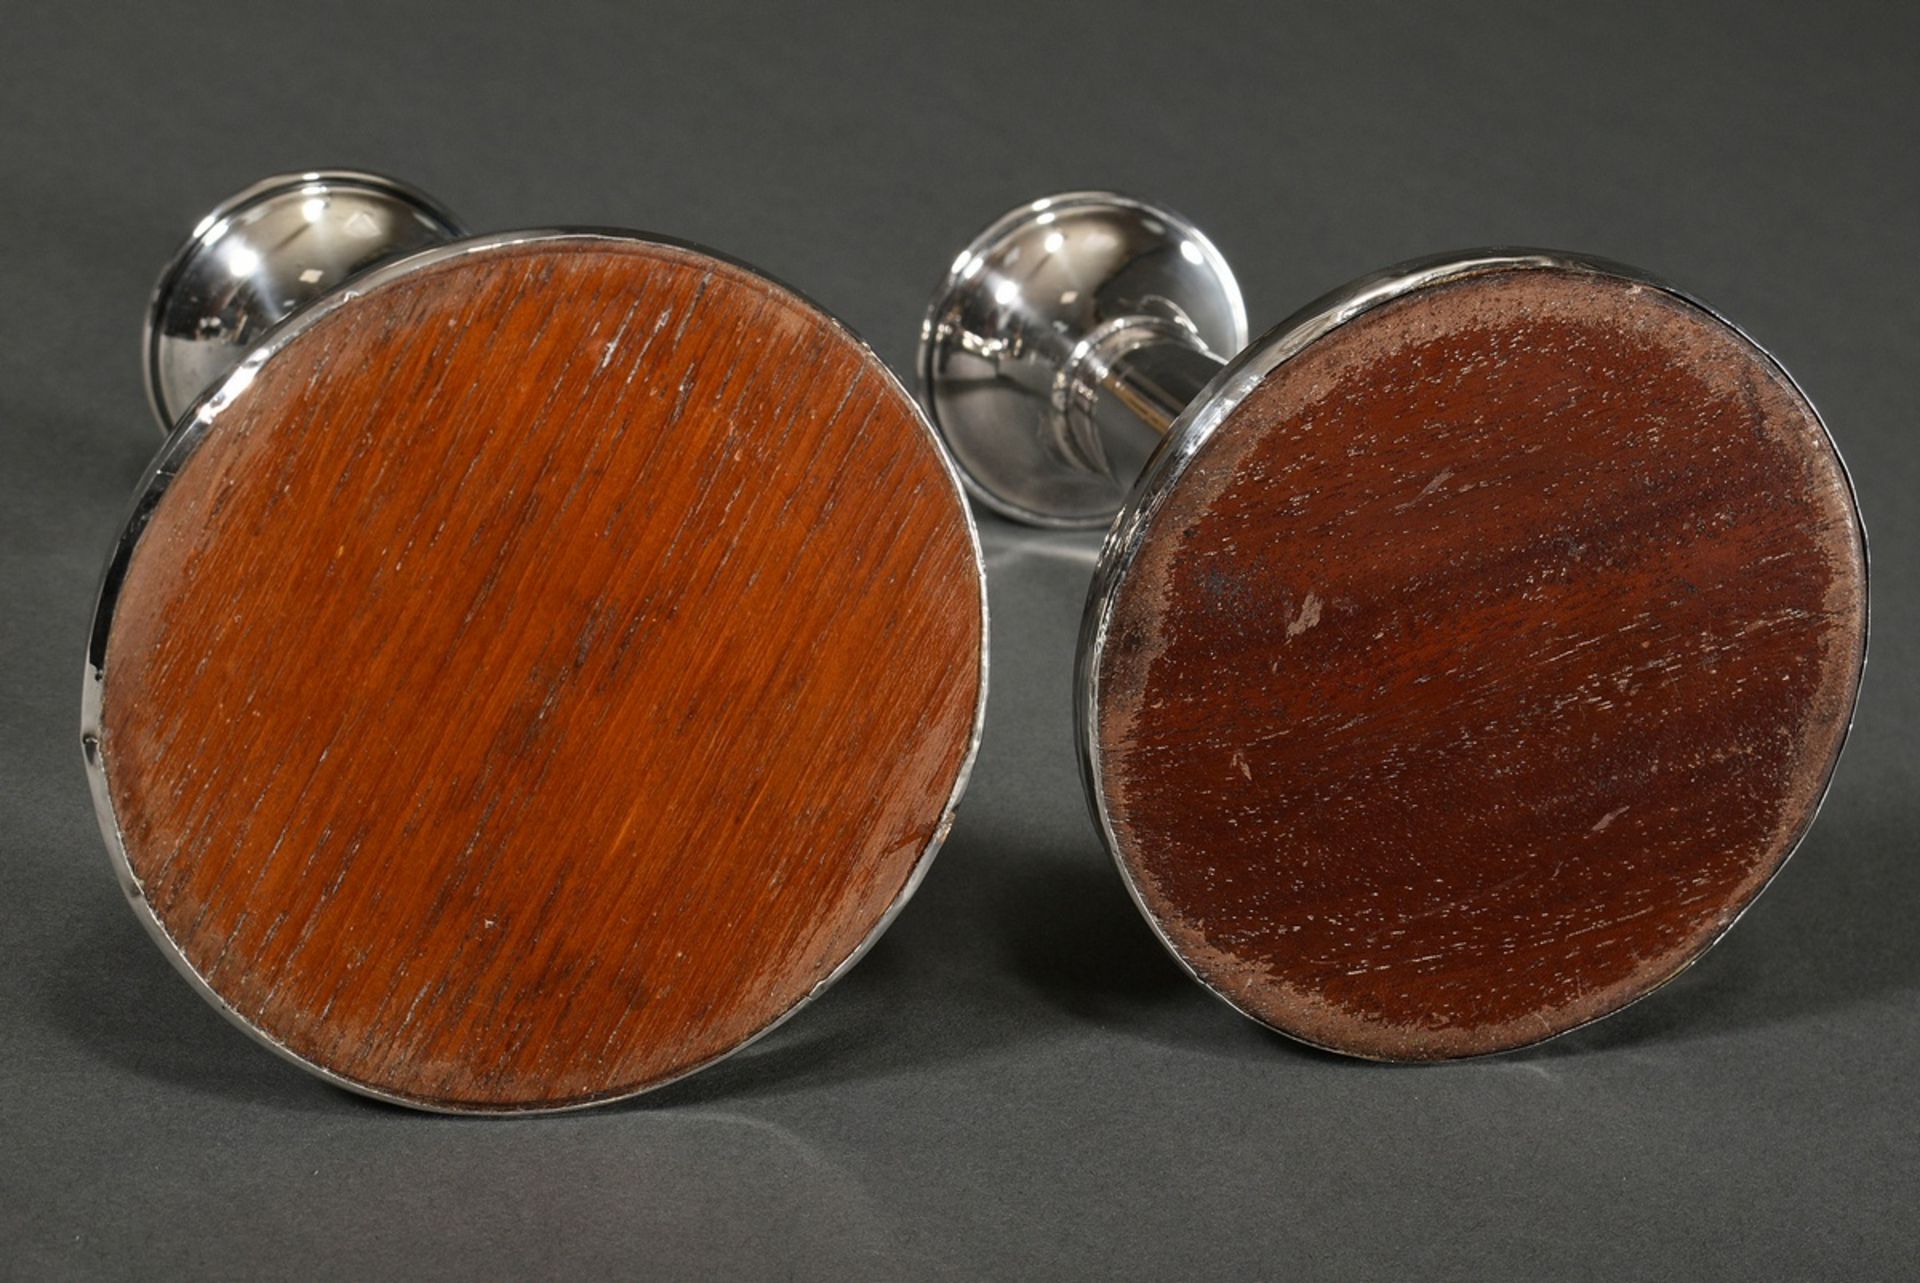 2 Plain candlesticks on a round foot with wooden base plate, MM: William Devenport, Birmingham 1909 - Image 3 of 3